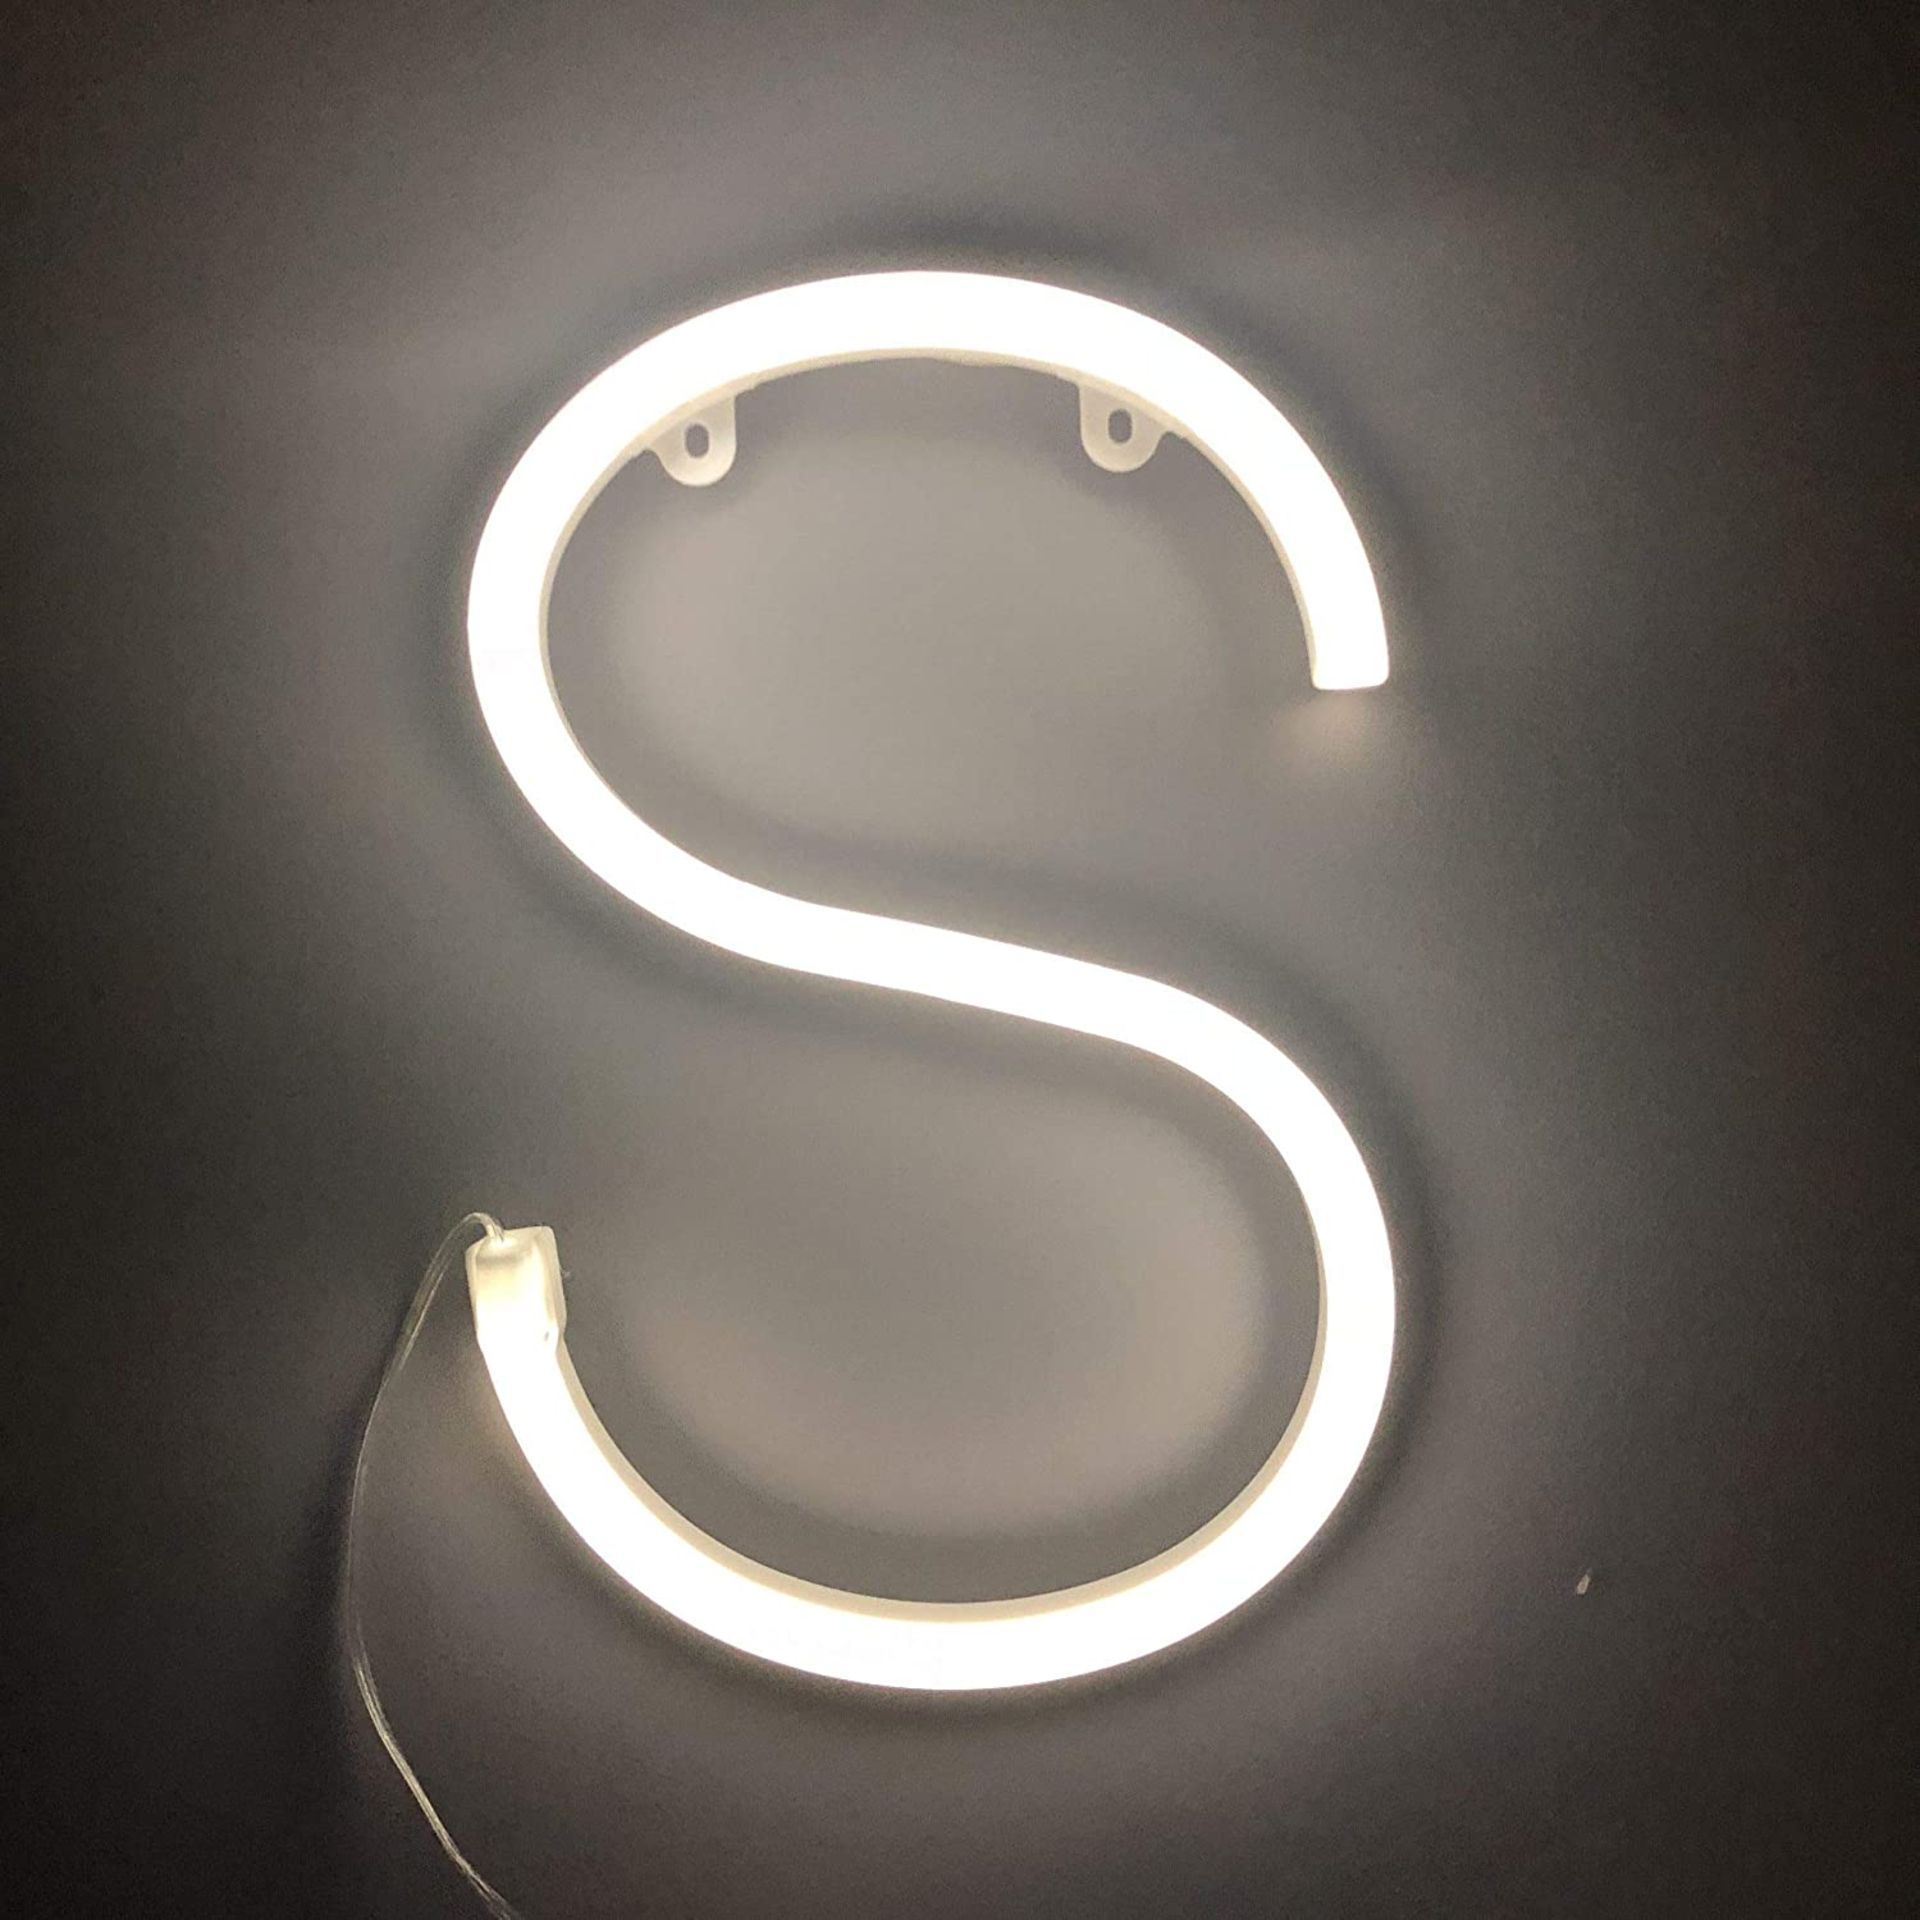 30 X BRAND NEW NEON WHITE LETTER LIGHTS ASSORTED (FREE STANDING OR WALL HANGING) RRP £15 EACH S1RA